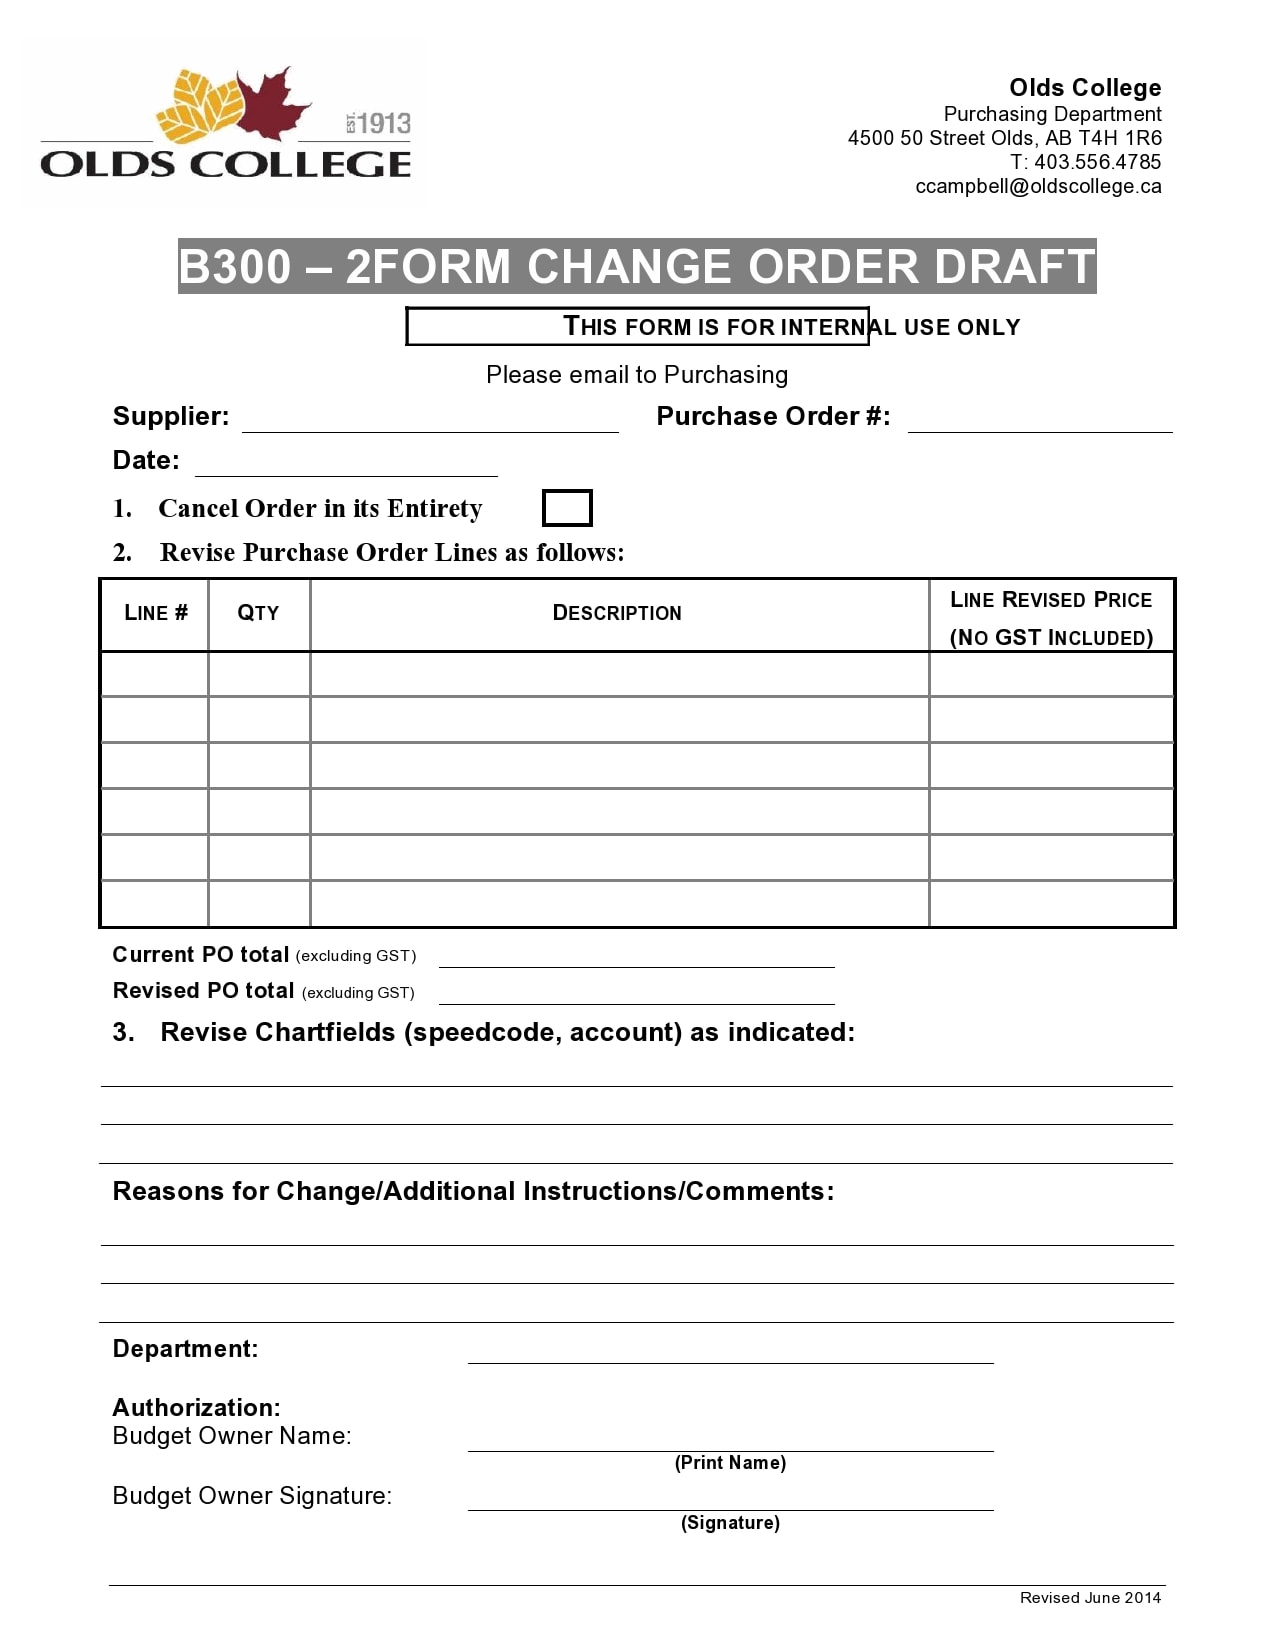 25 Free Change Order Templates (Word, Excel, PDF) - TemplateArchive For Blank Money Order Template